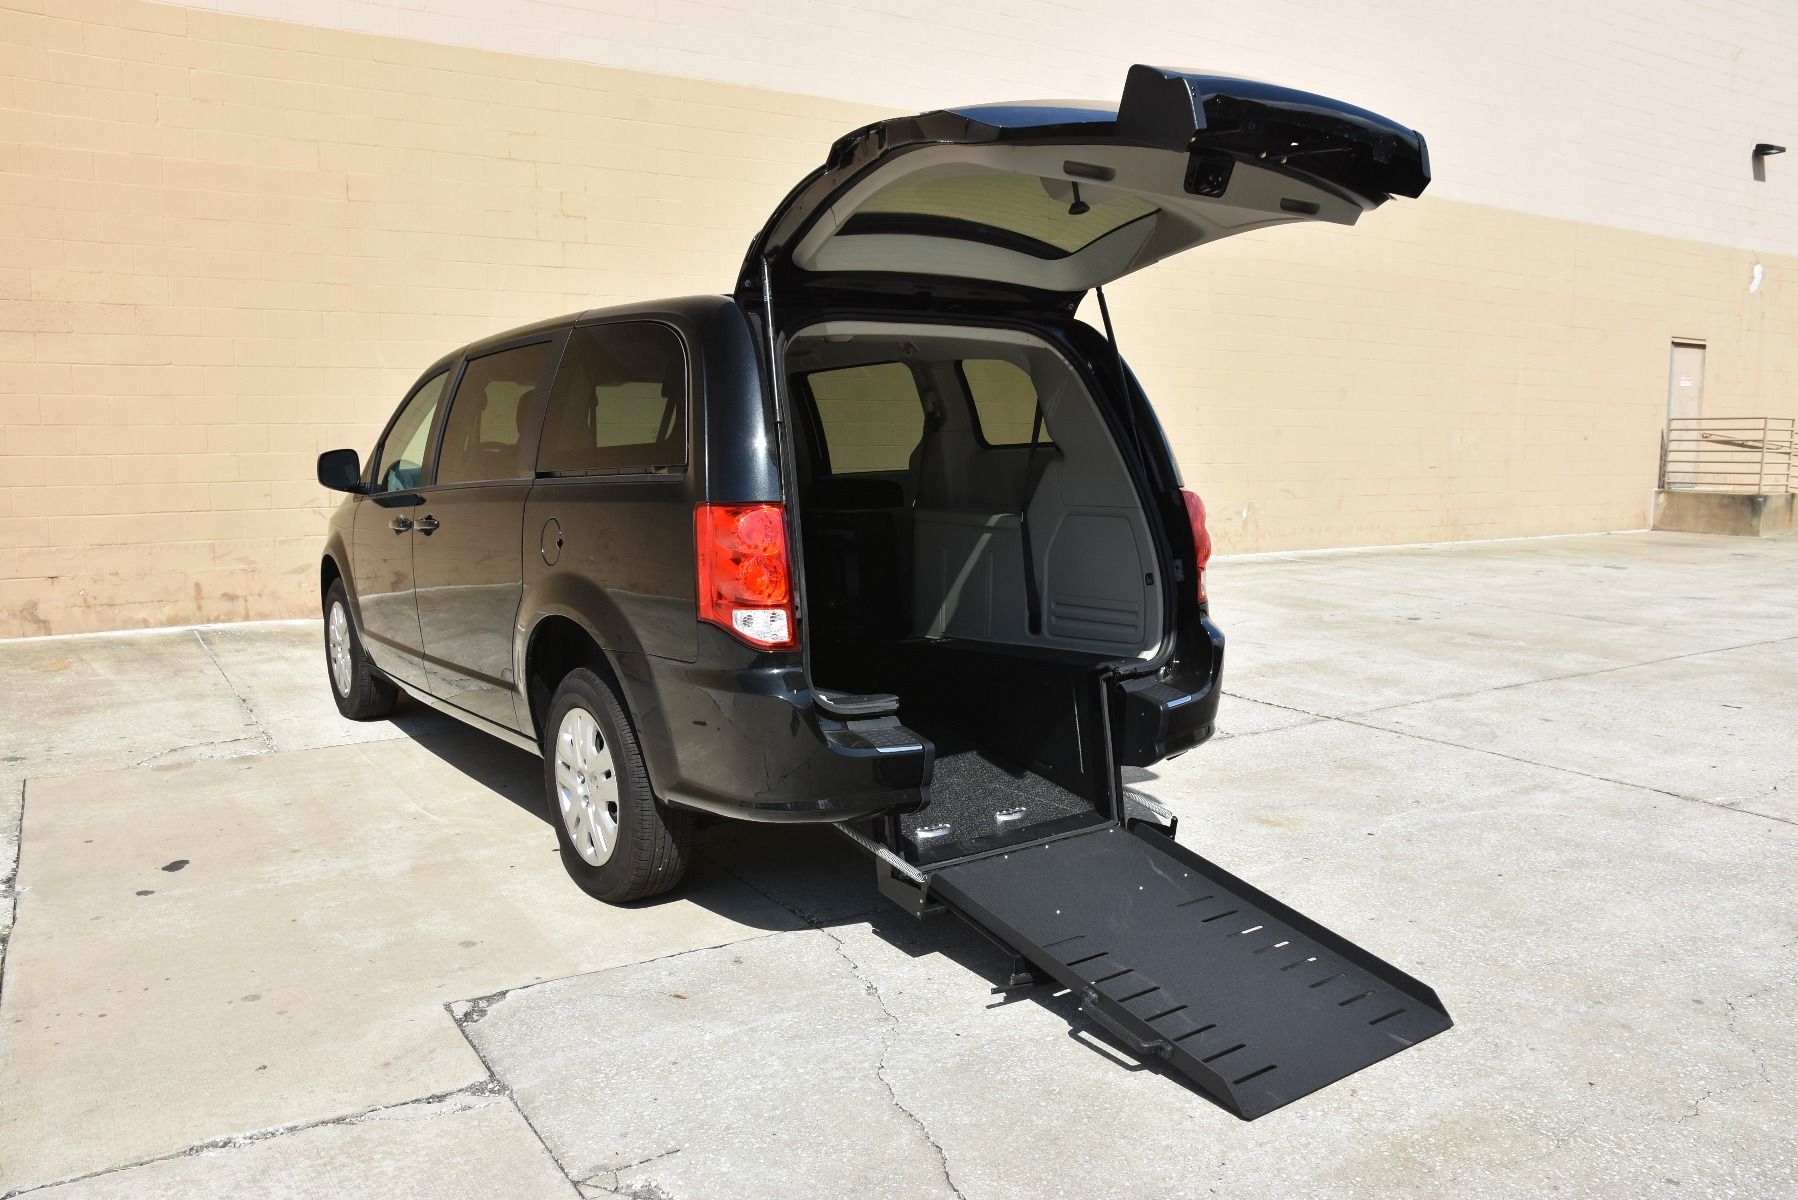 2018 Dodge Grand Caravan in Black with Rear Entry Ramp Conversion